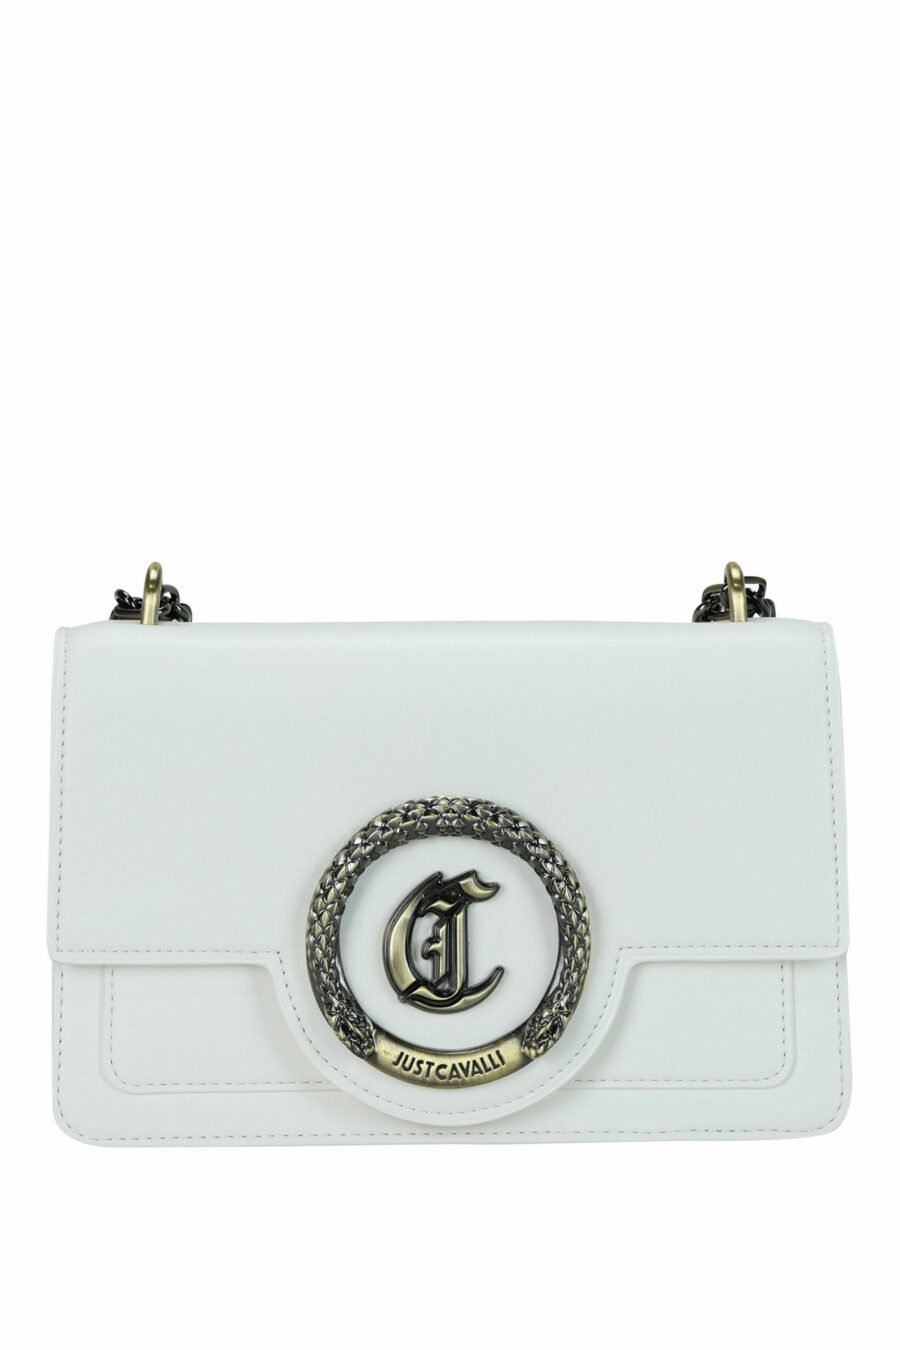 White square shoulder bag with chain and golden circular "c" logo - 8052672735584 scaled